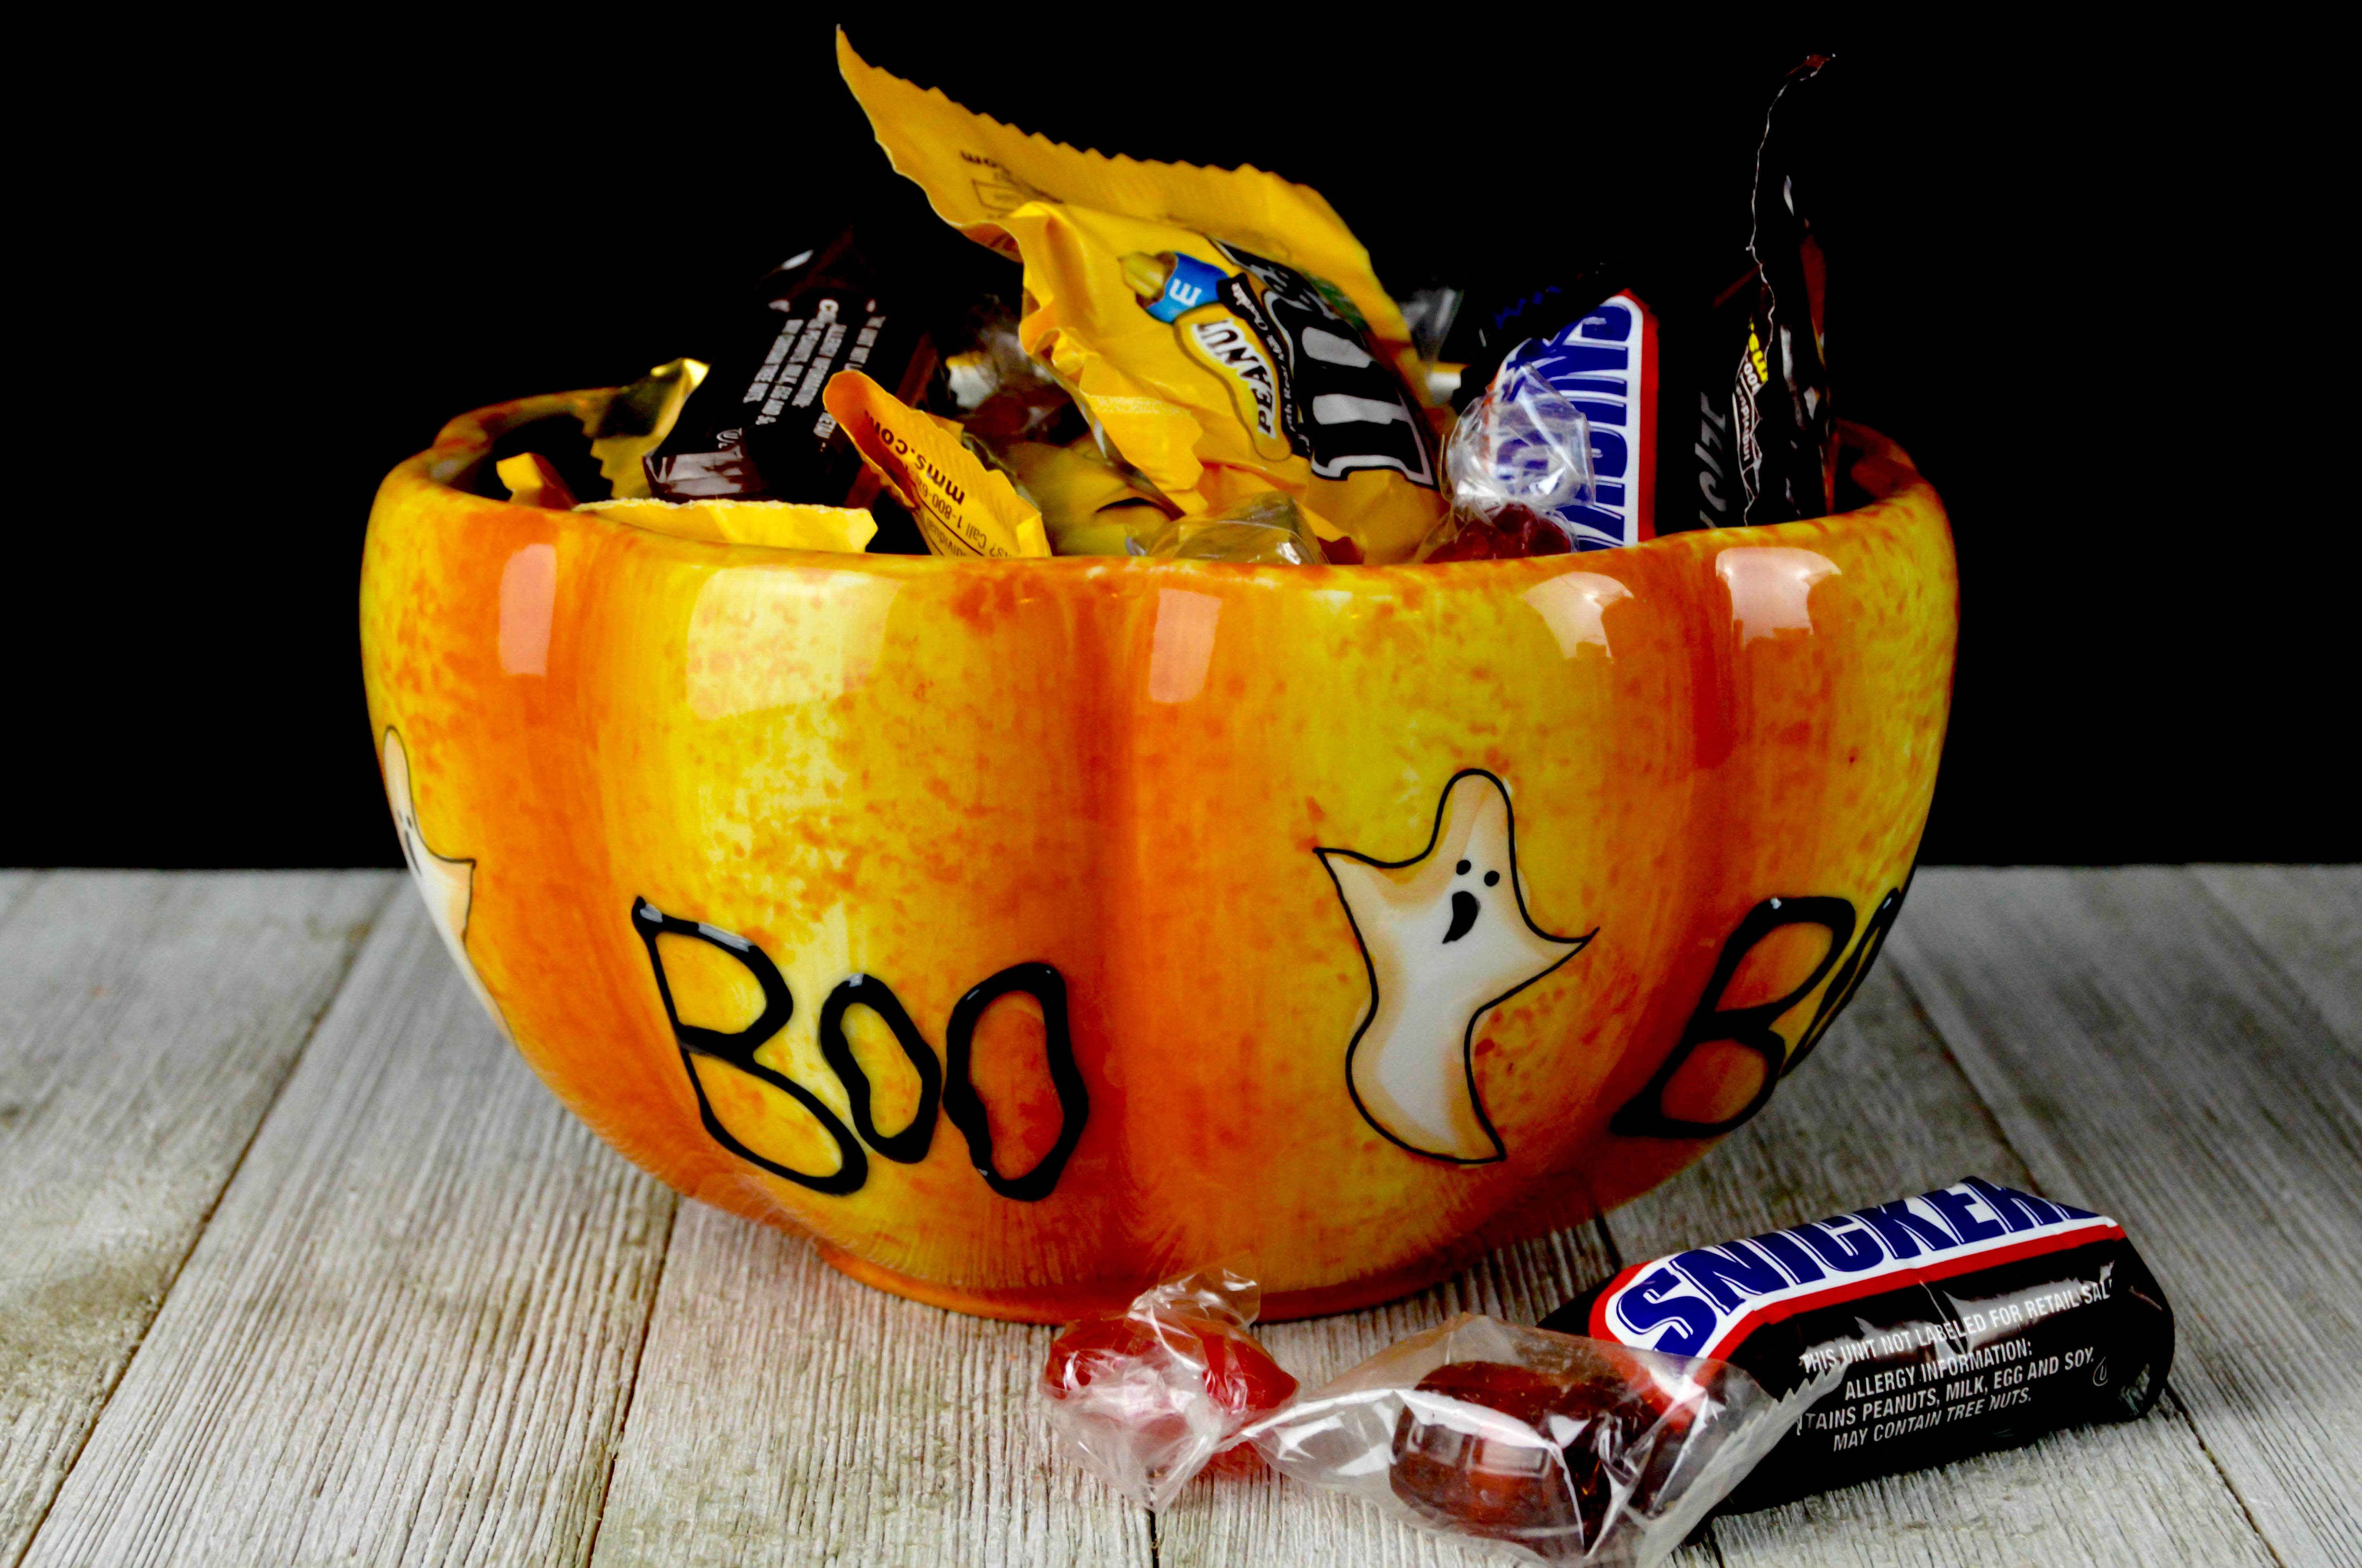 An orange ceramic bowl, shaped like the bottom half of a pumpkin and painted with ghosts and the word “boo,” overflows with name-brand candy like Snickers and peanut M&amp;Ms. 